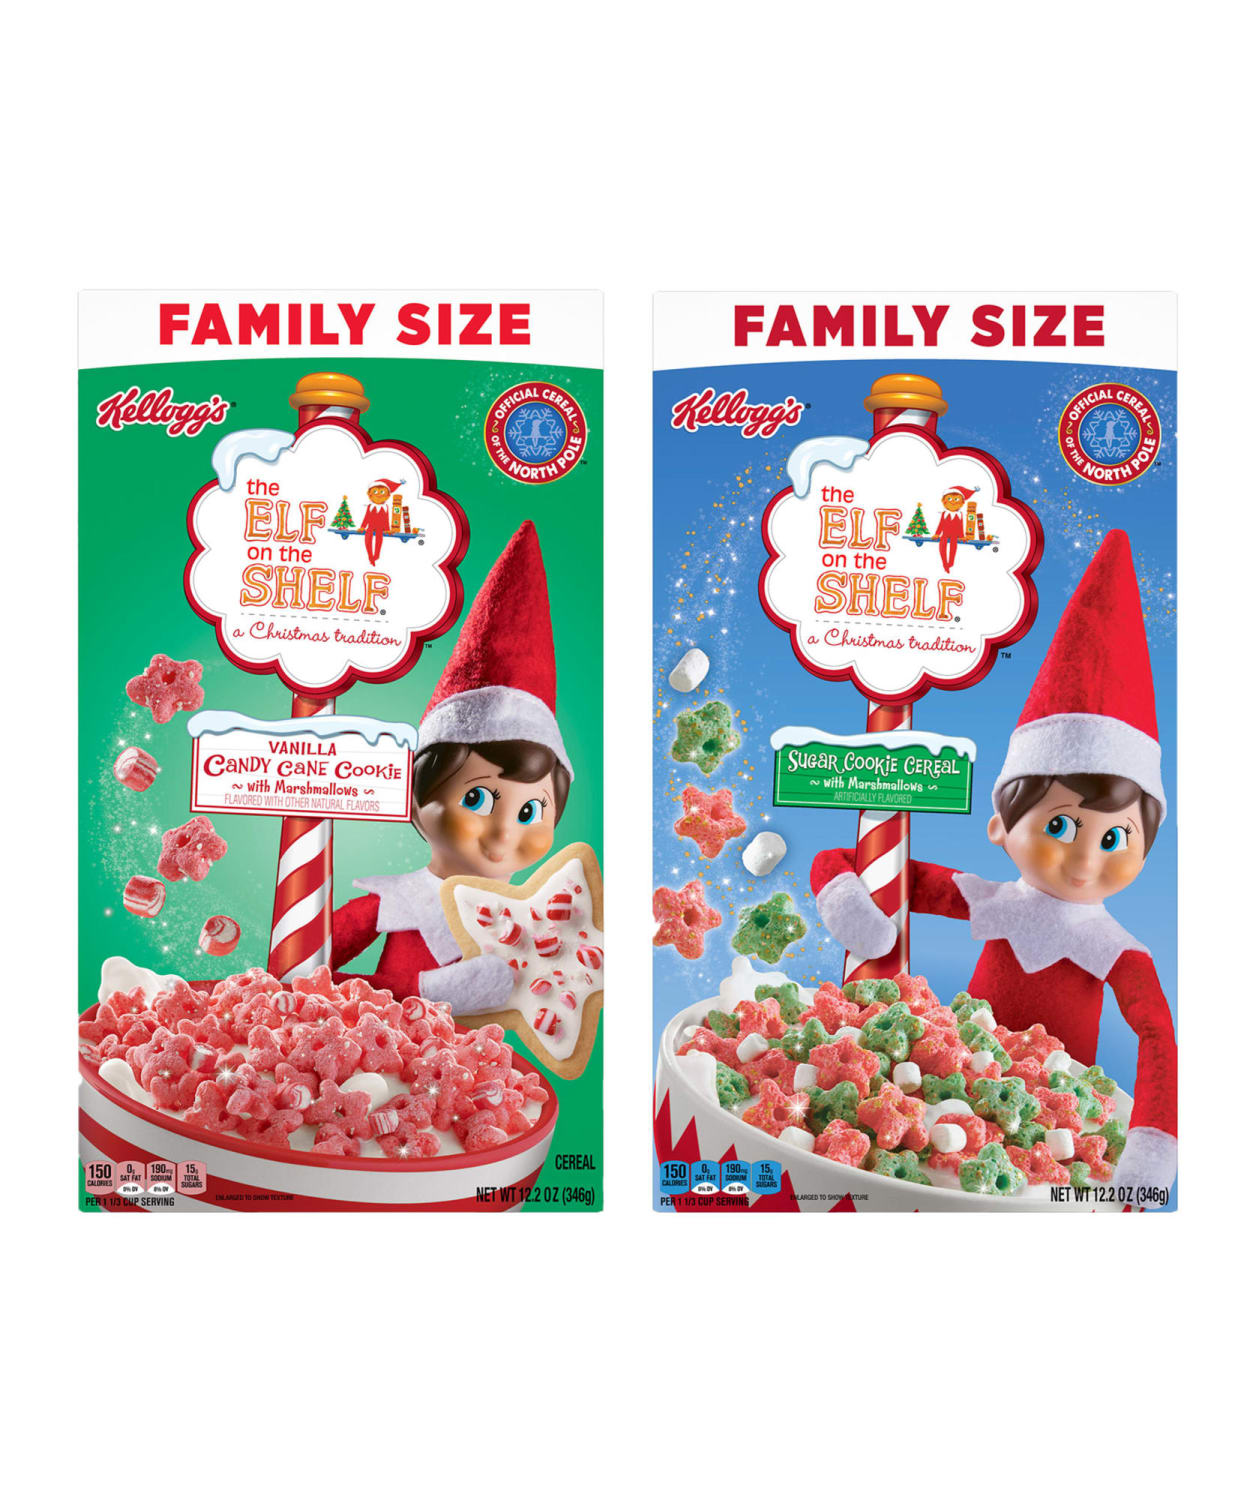 New Kellogg’s Elf on the Shelf Vanilla Candy Cane Cookie Cereal is here